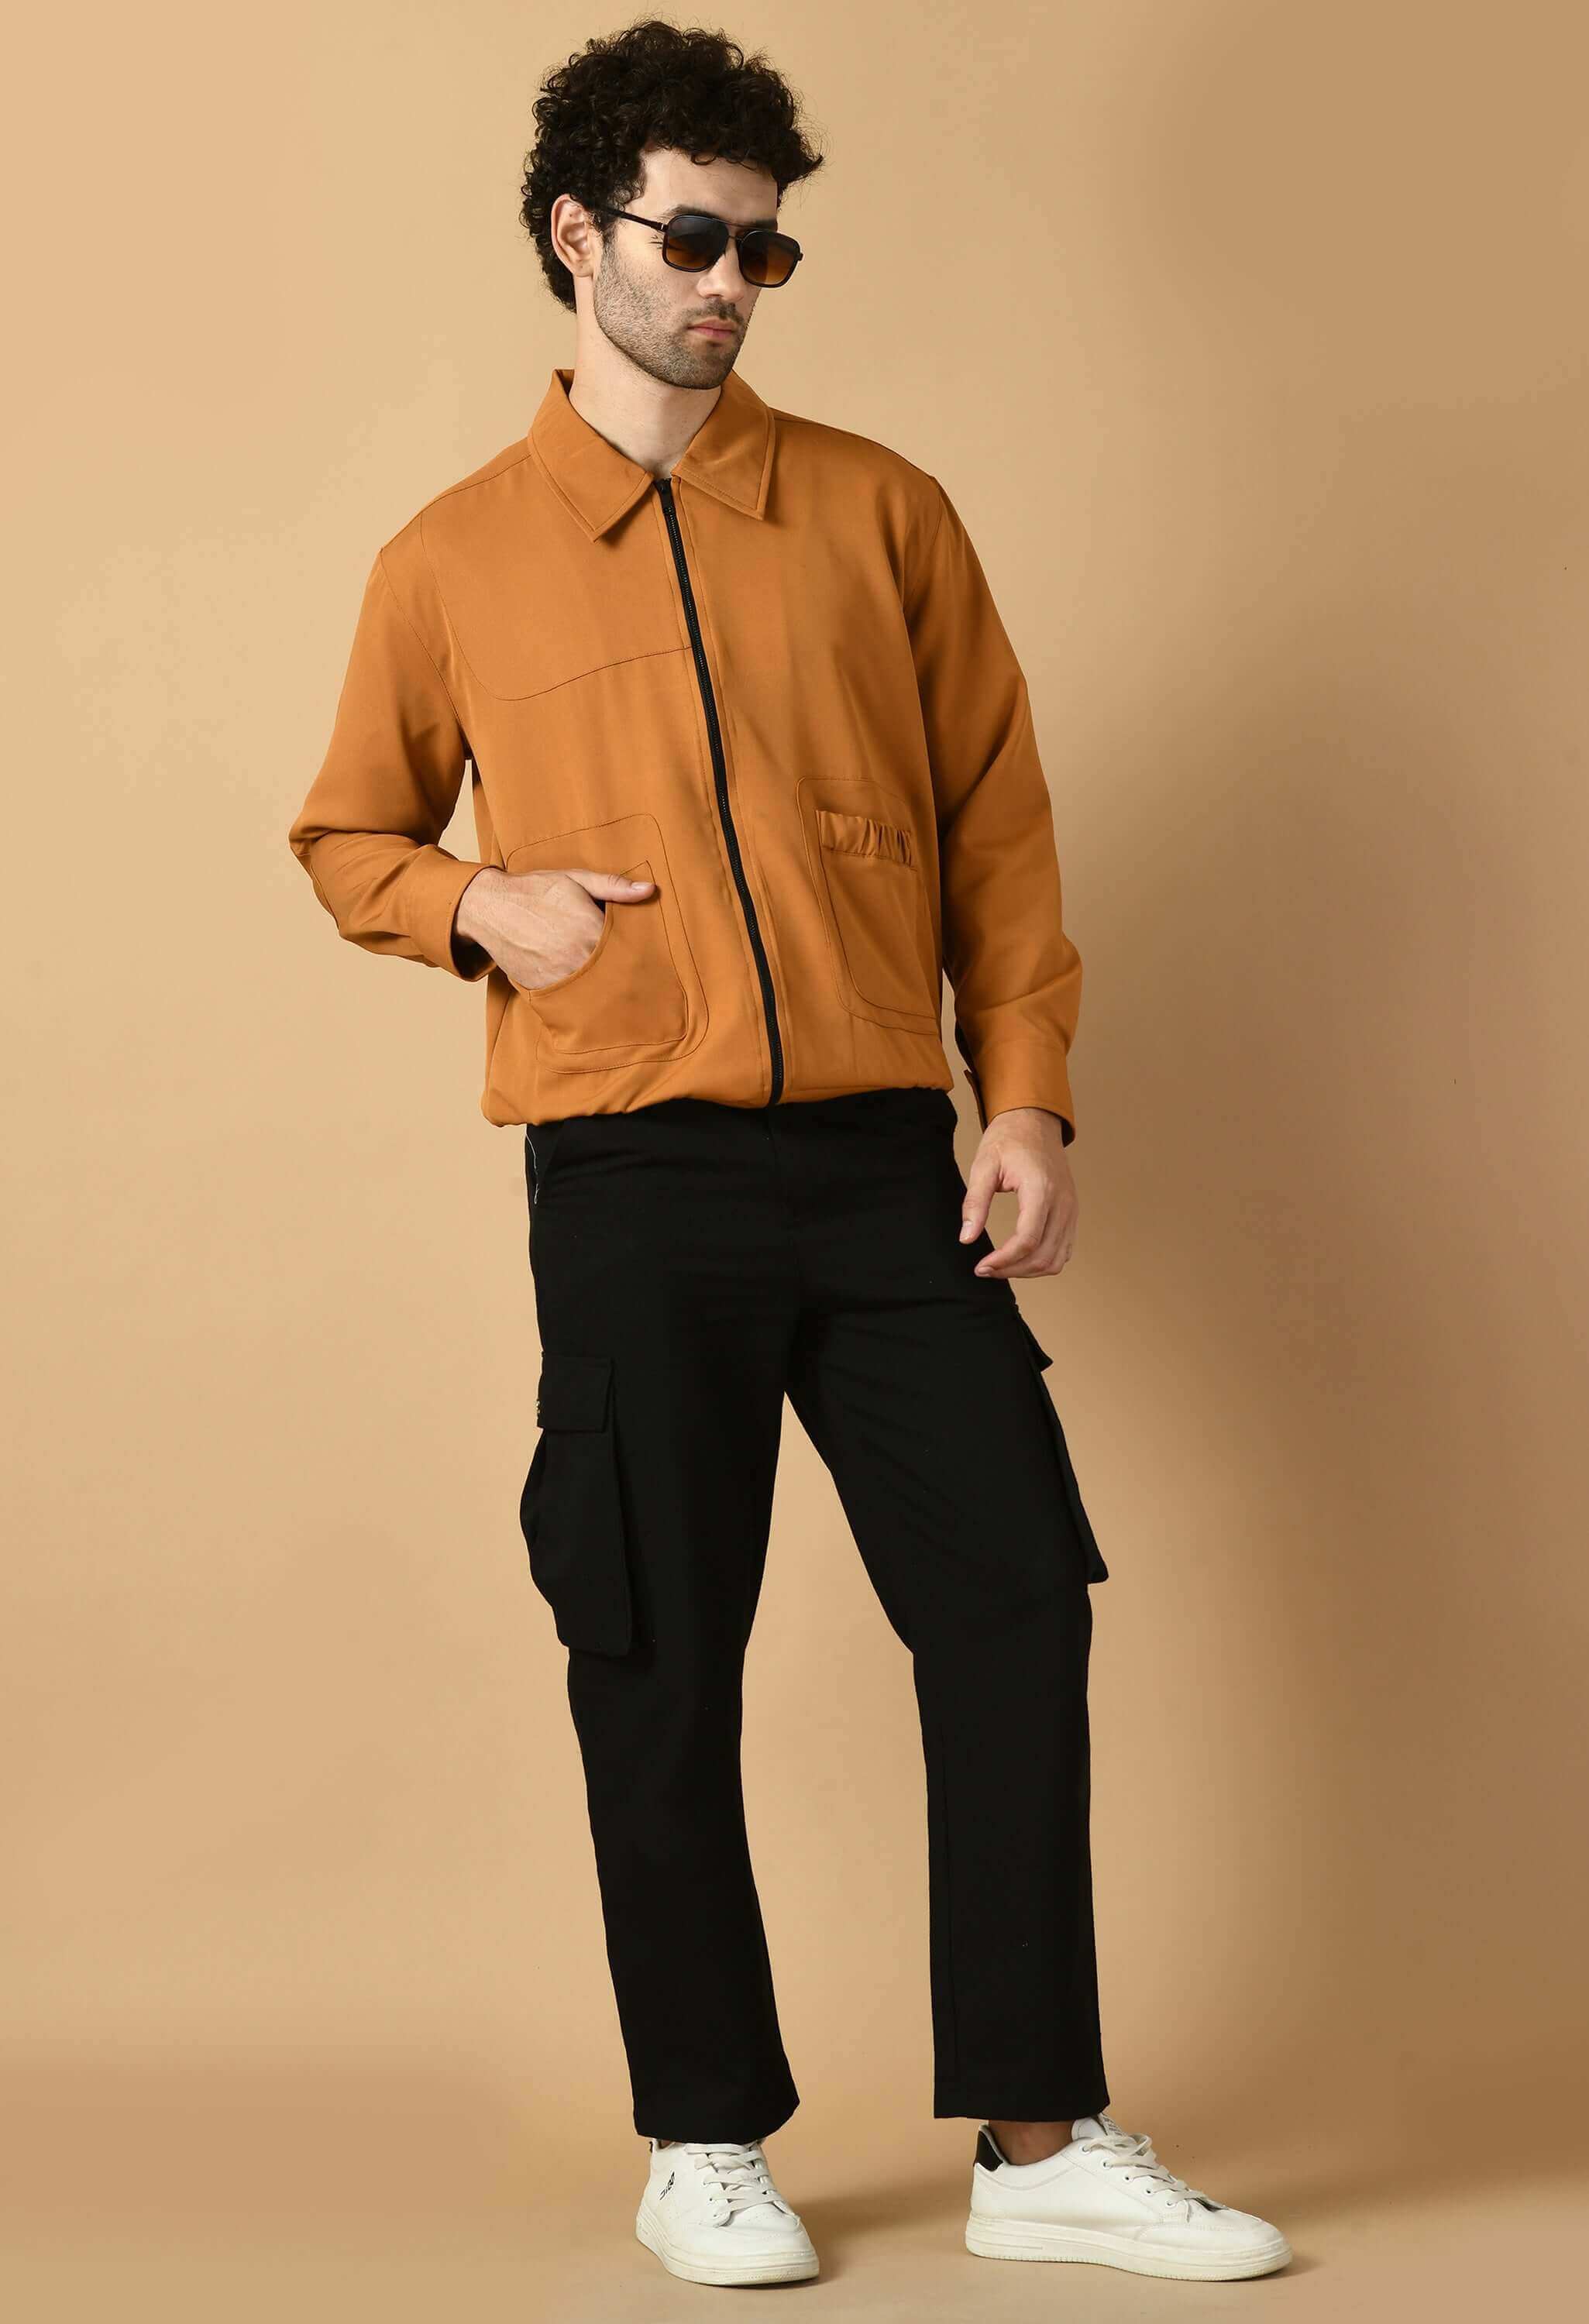 Bomber jacket brown plain color by offmint